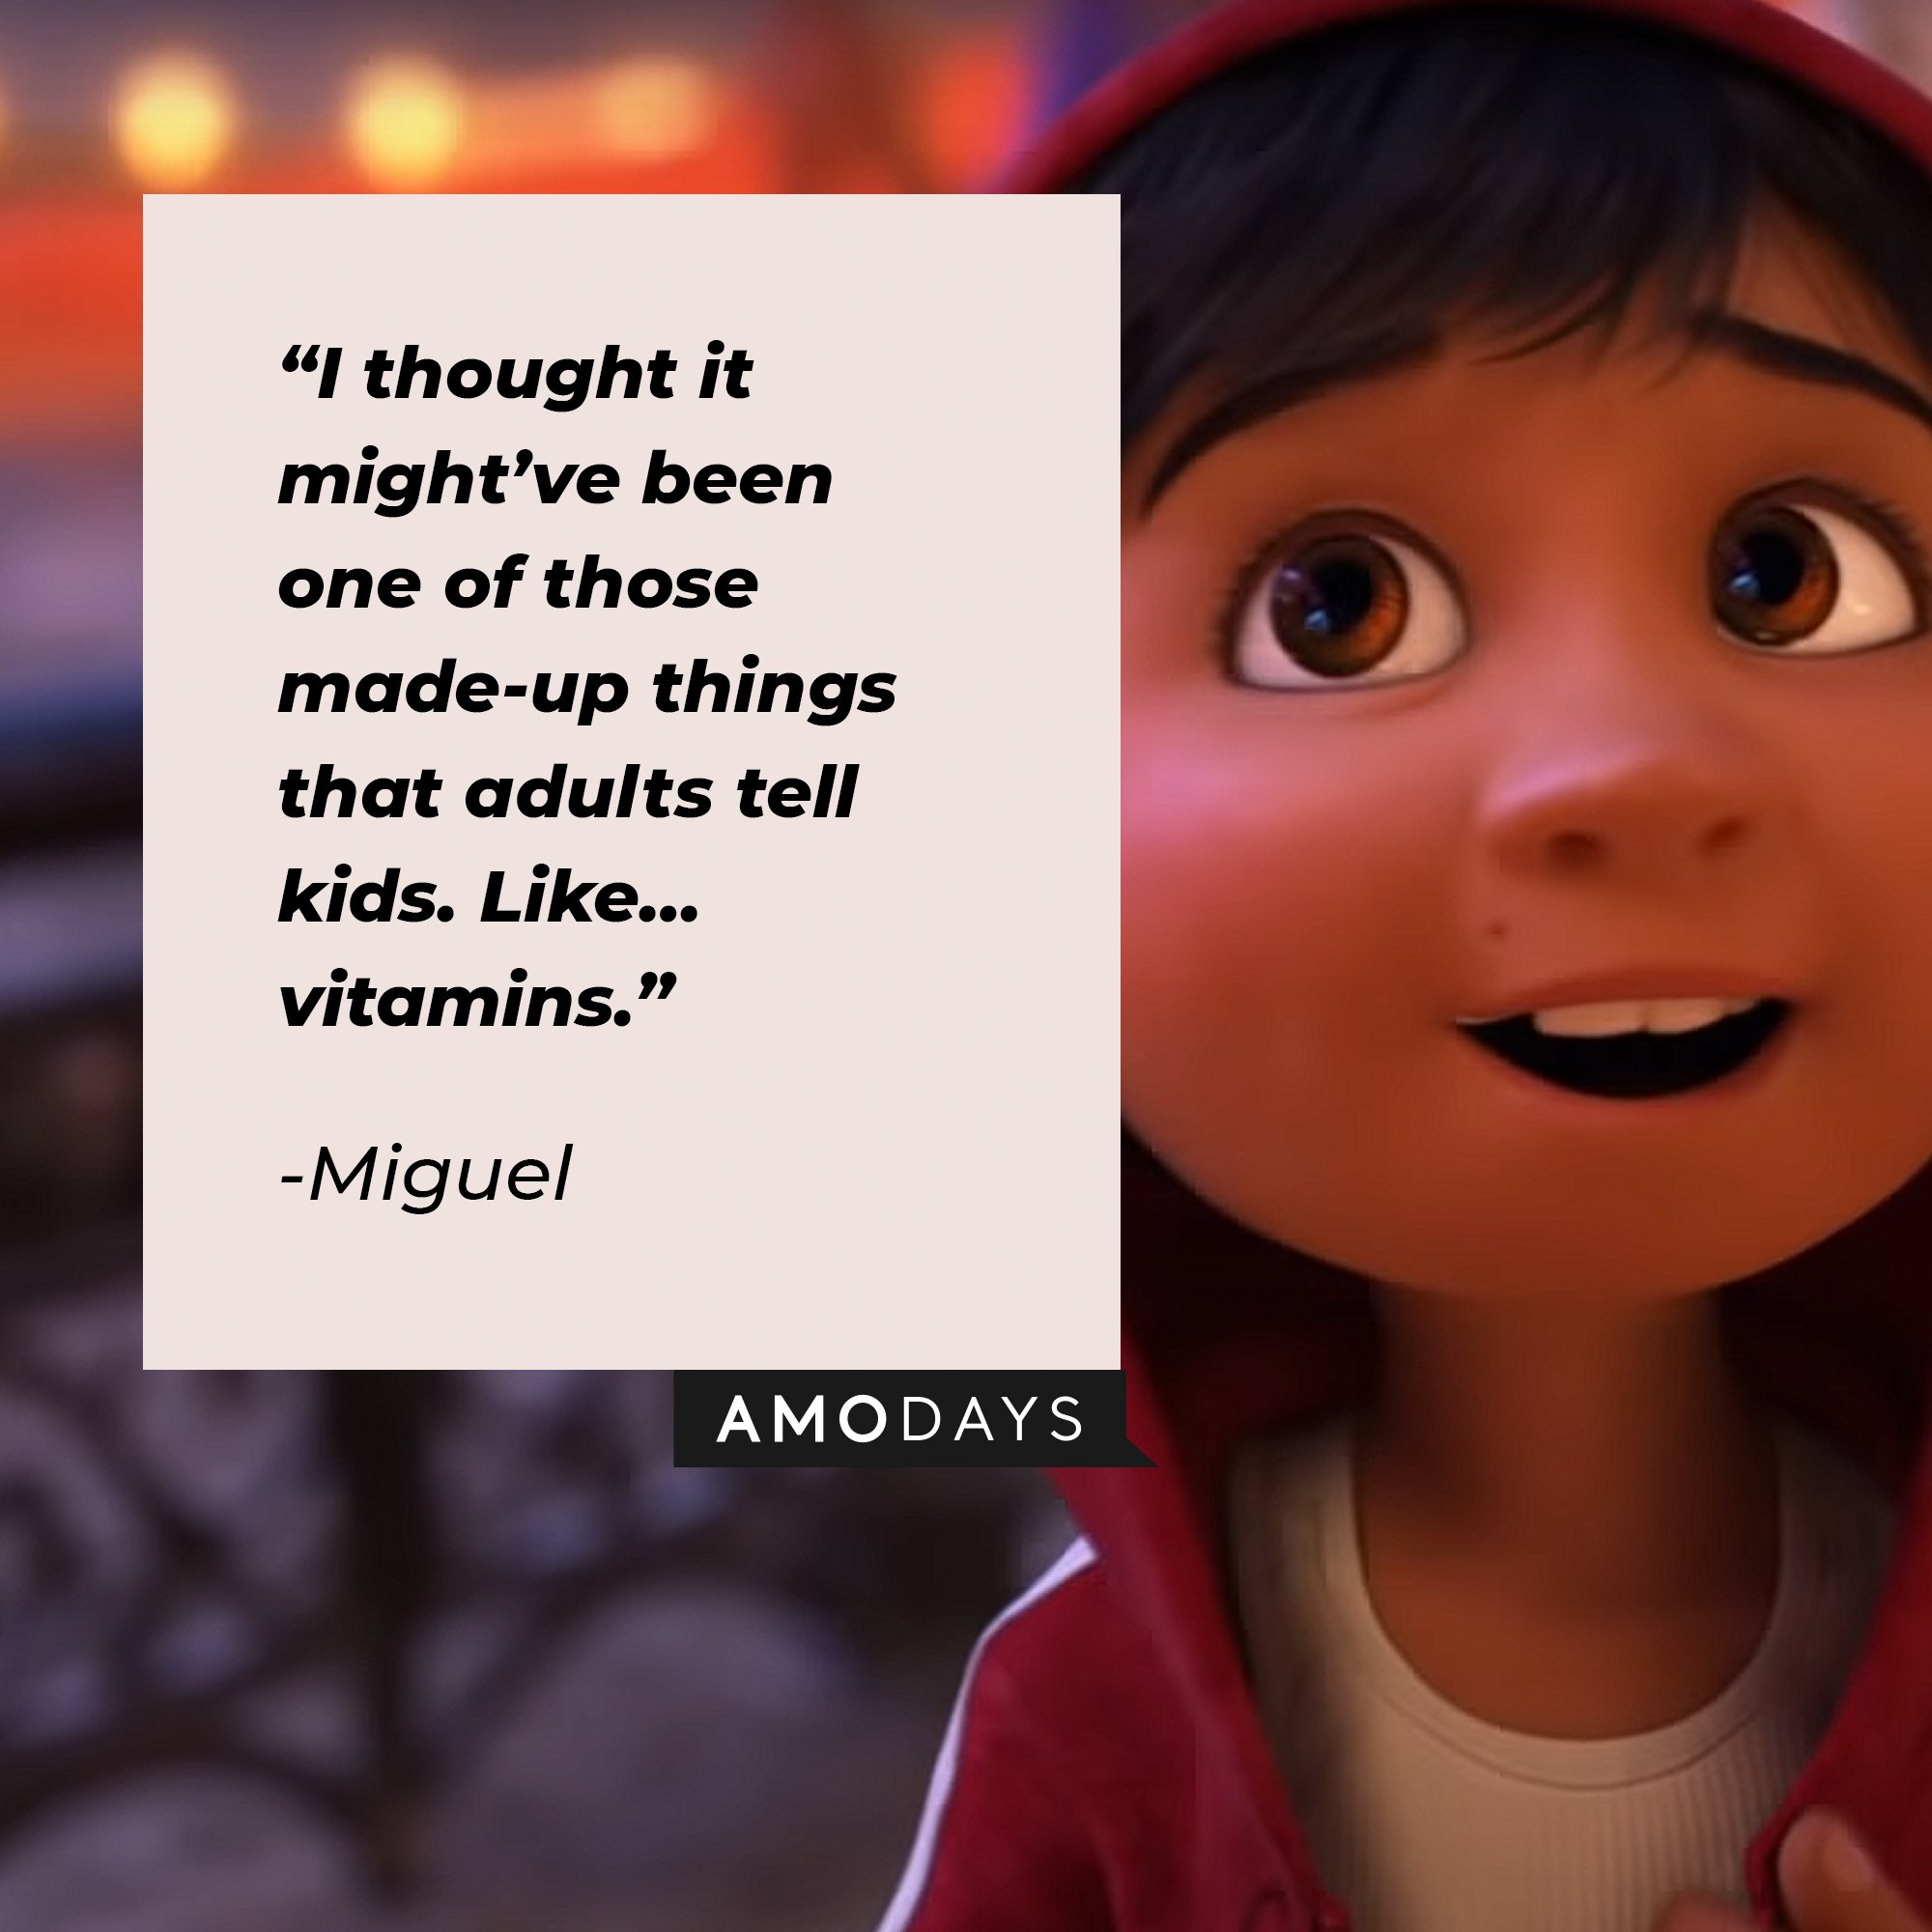 Miguel's quote: “I thought it might’ve been one of those made-up things that adults tell kids. Like… vitamins.” | Image: AmoDays